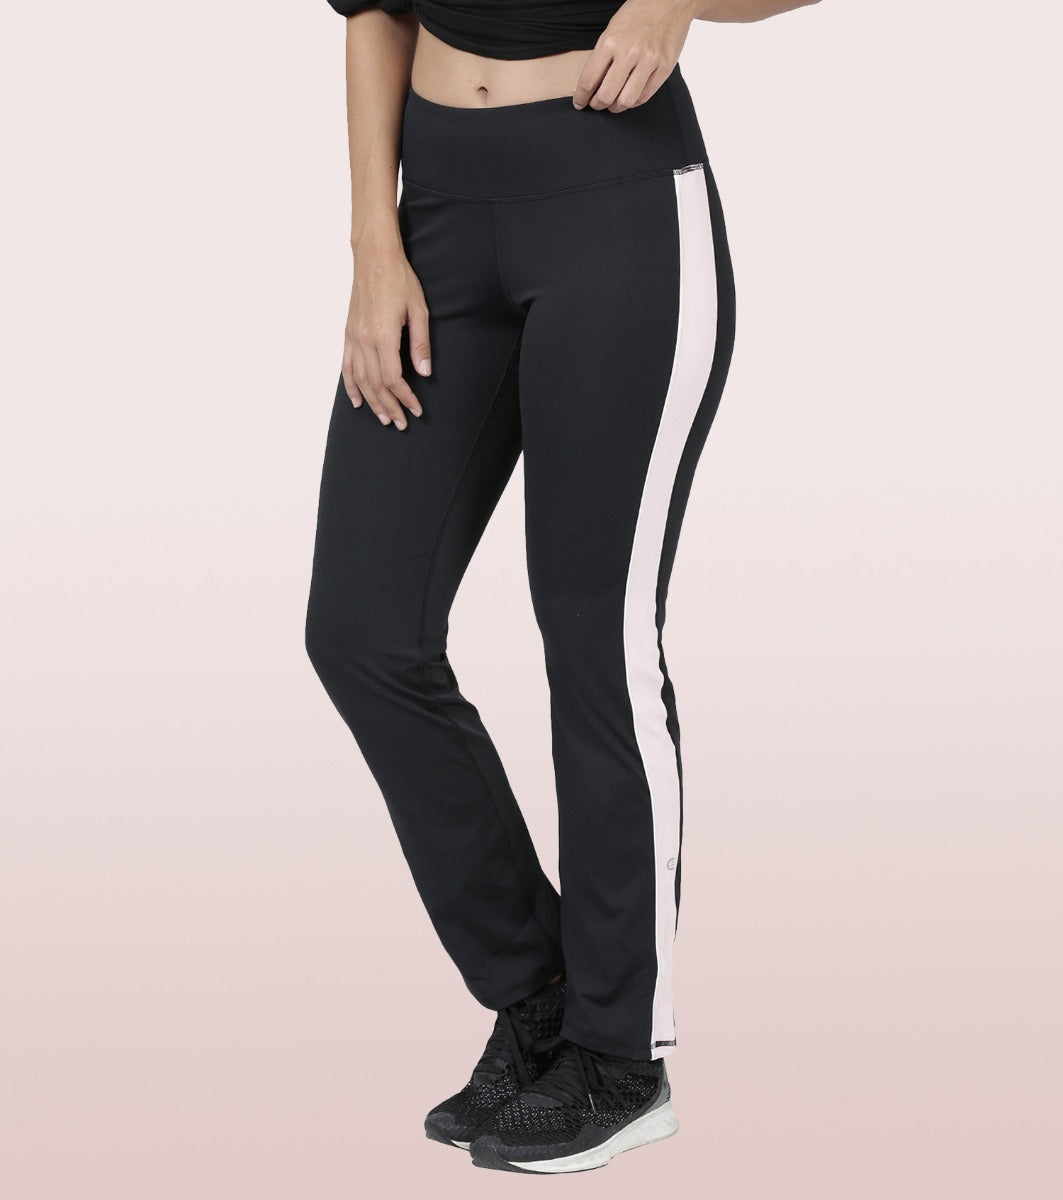 Athleisure Women's 4-way Stretch Active Pants